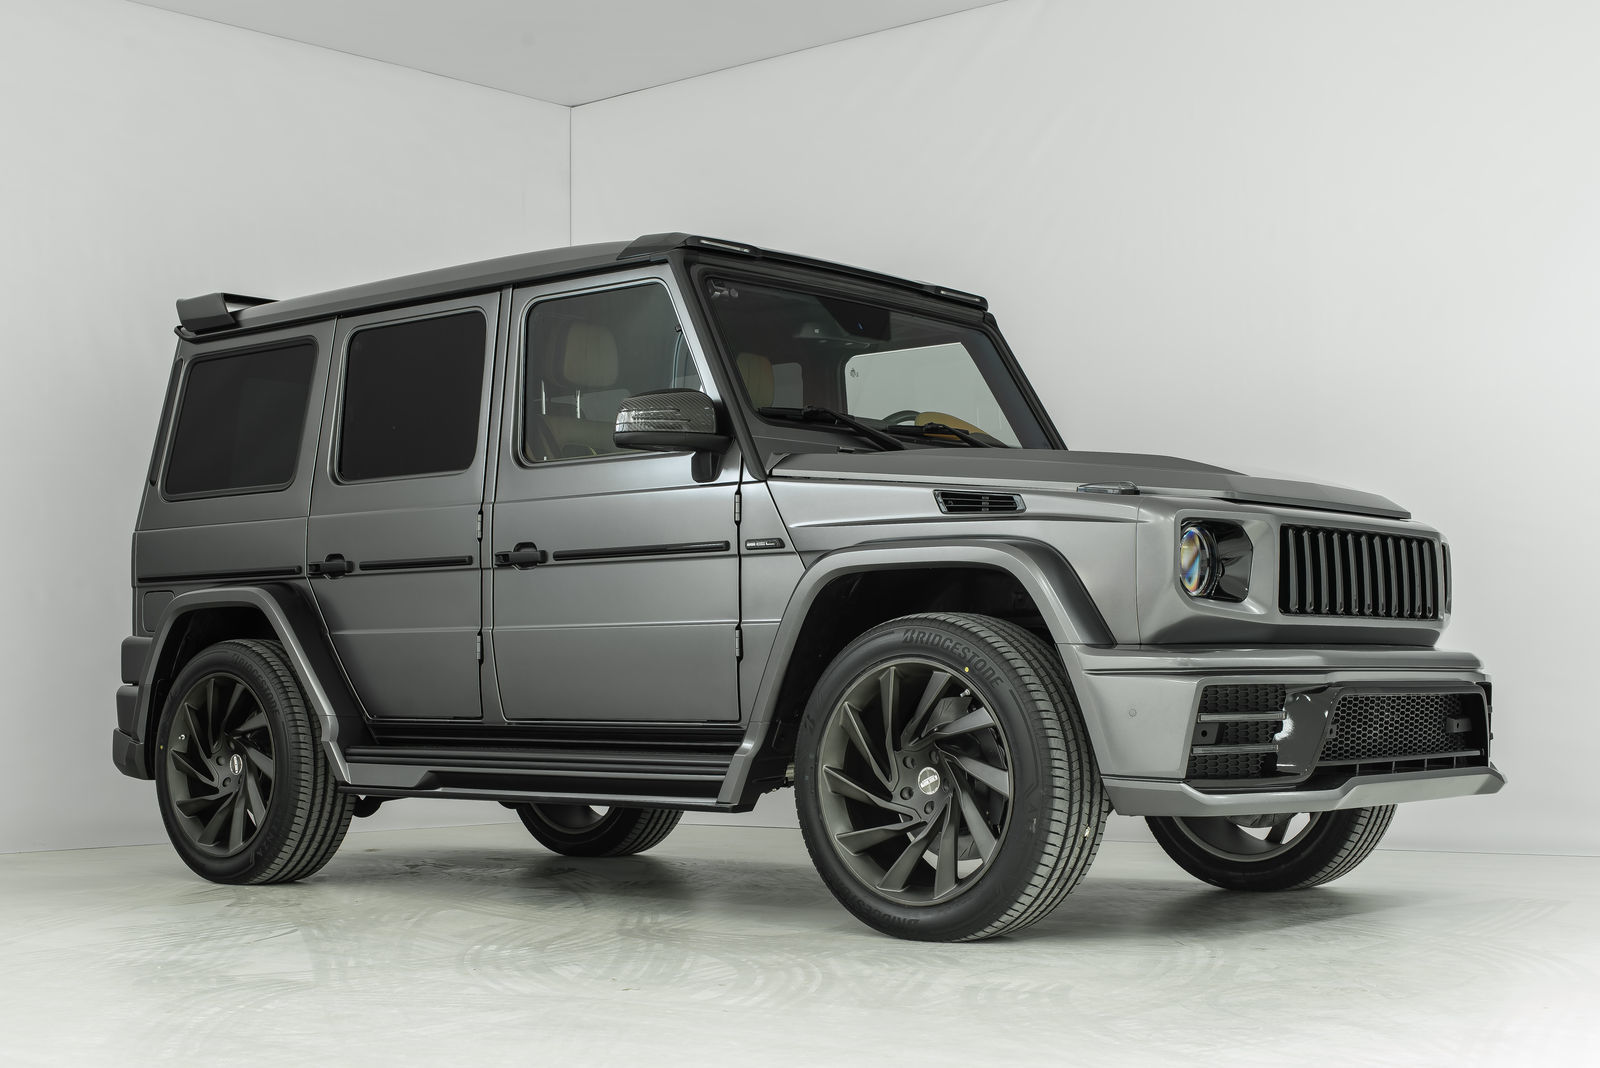 SCL PERFORMANCE GLOBAL DIAMANT body kit for MERCEDES G-CLASS